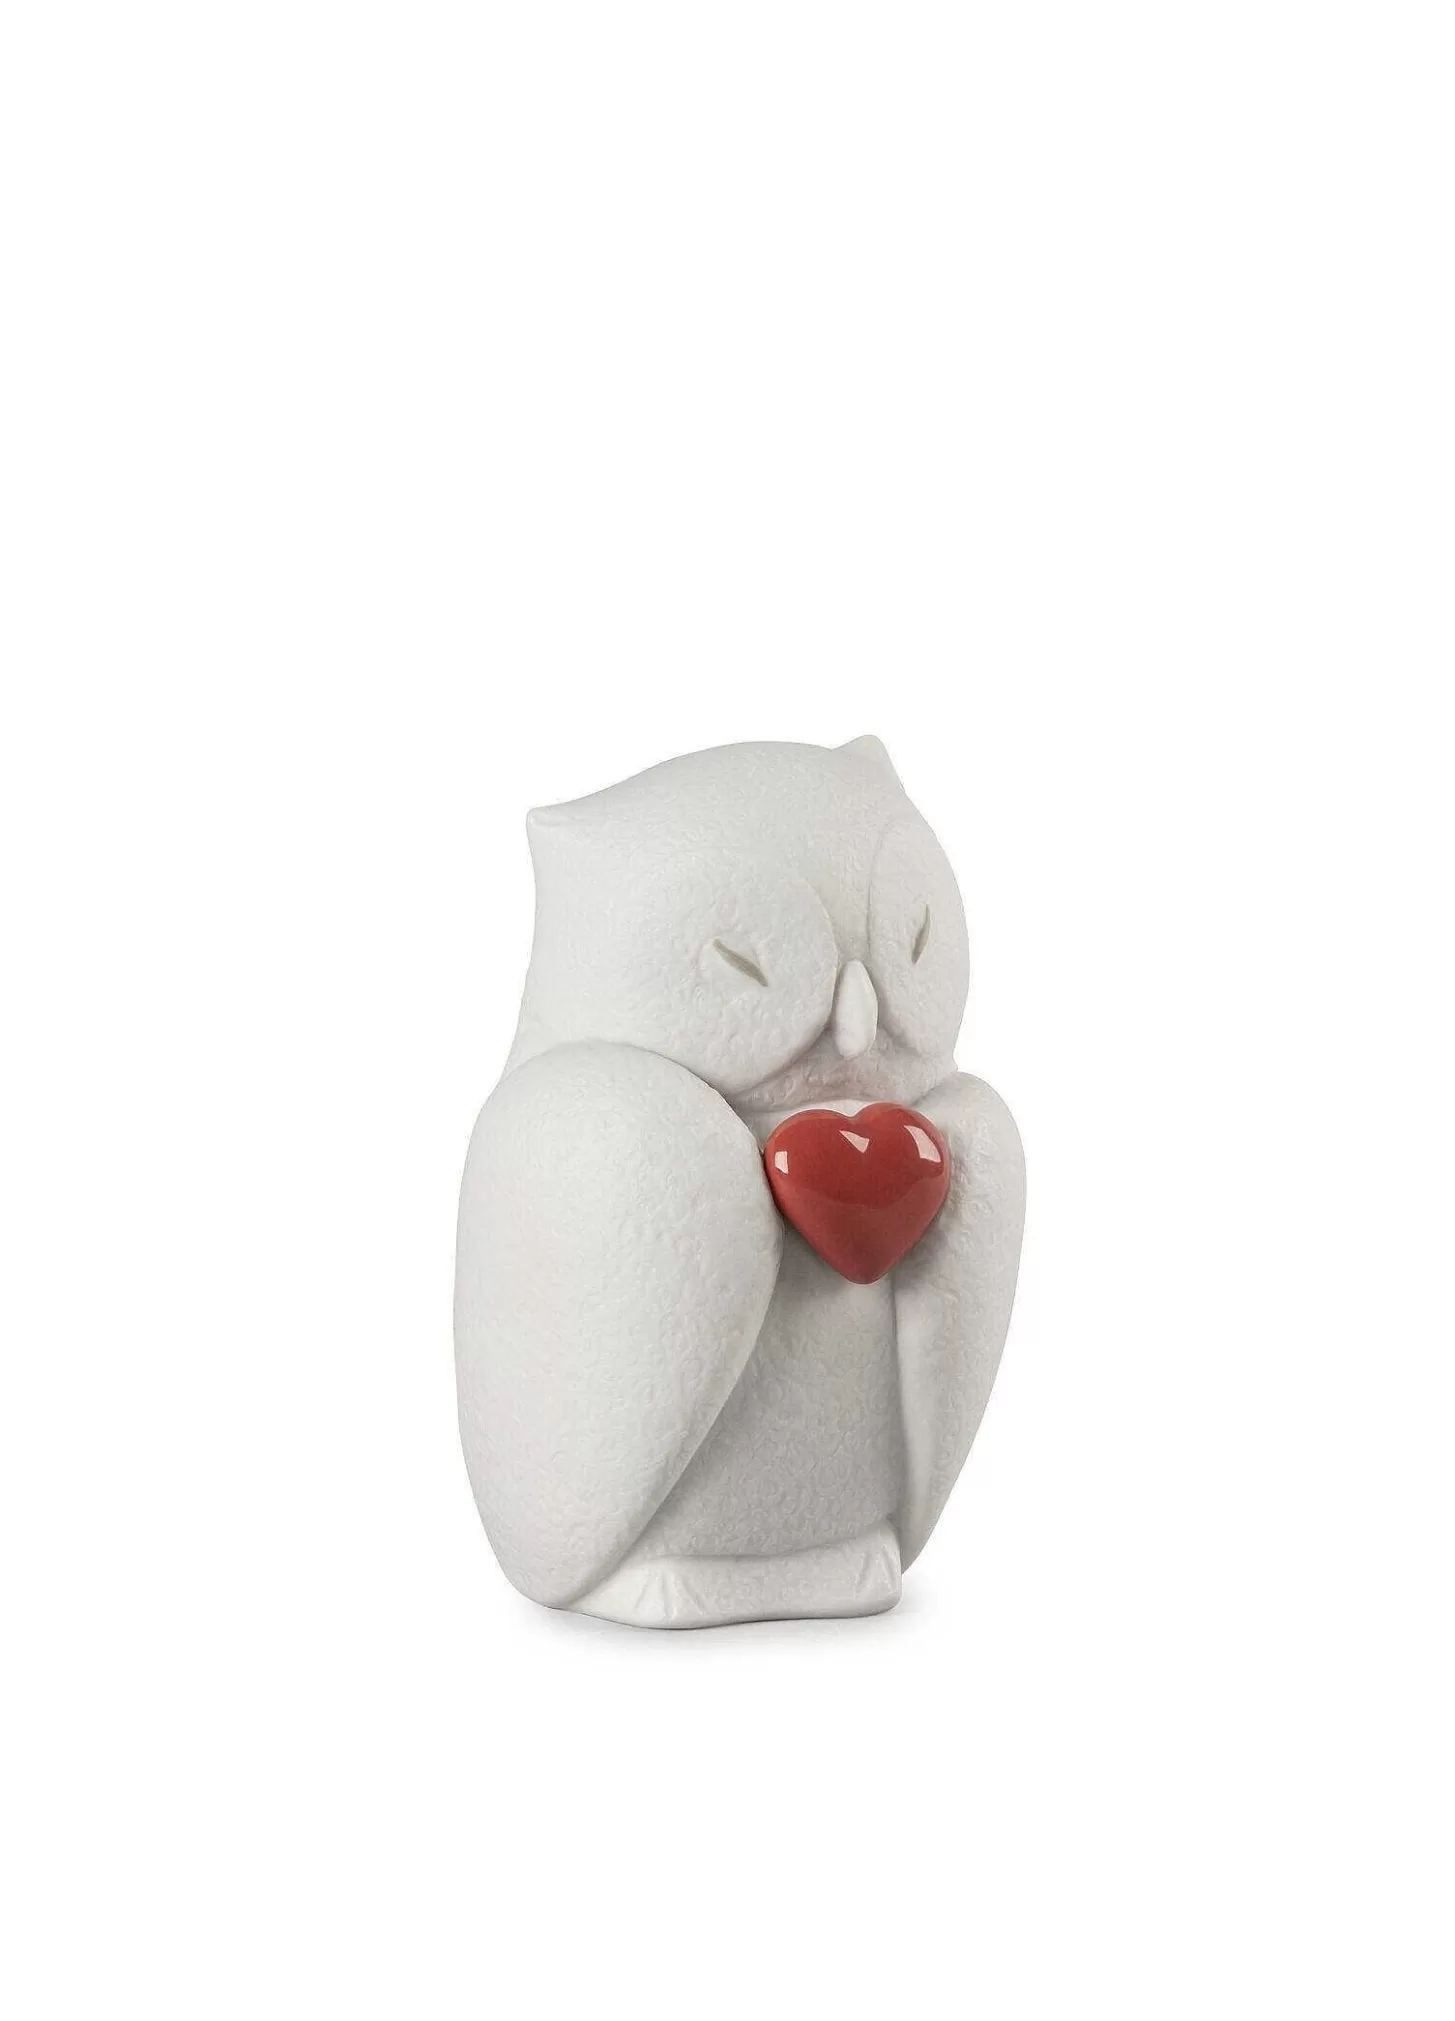 Lladró Reese-Intuitive Owl Figurine^ Gifts